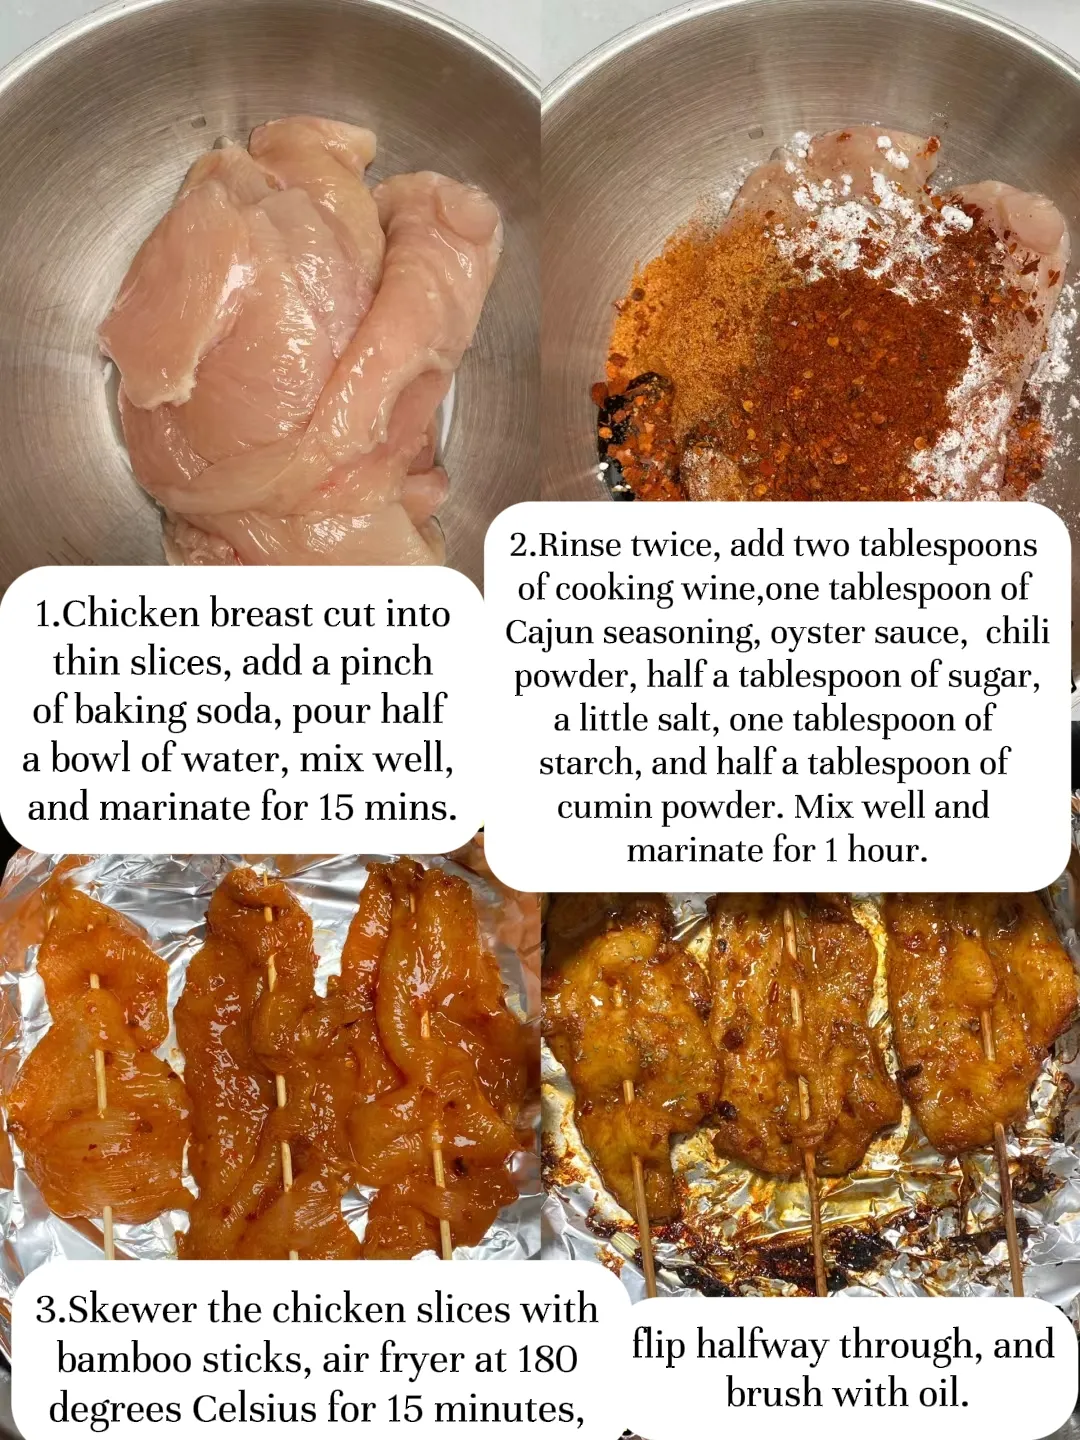 Chicken breast can be eaten like this?! | Gallery posted by Fiona